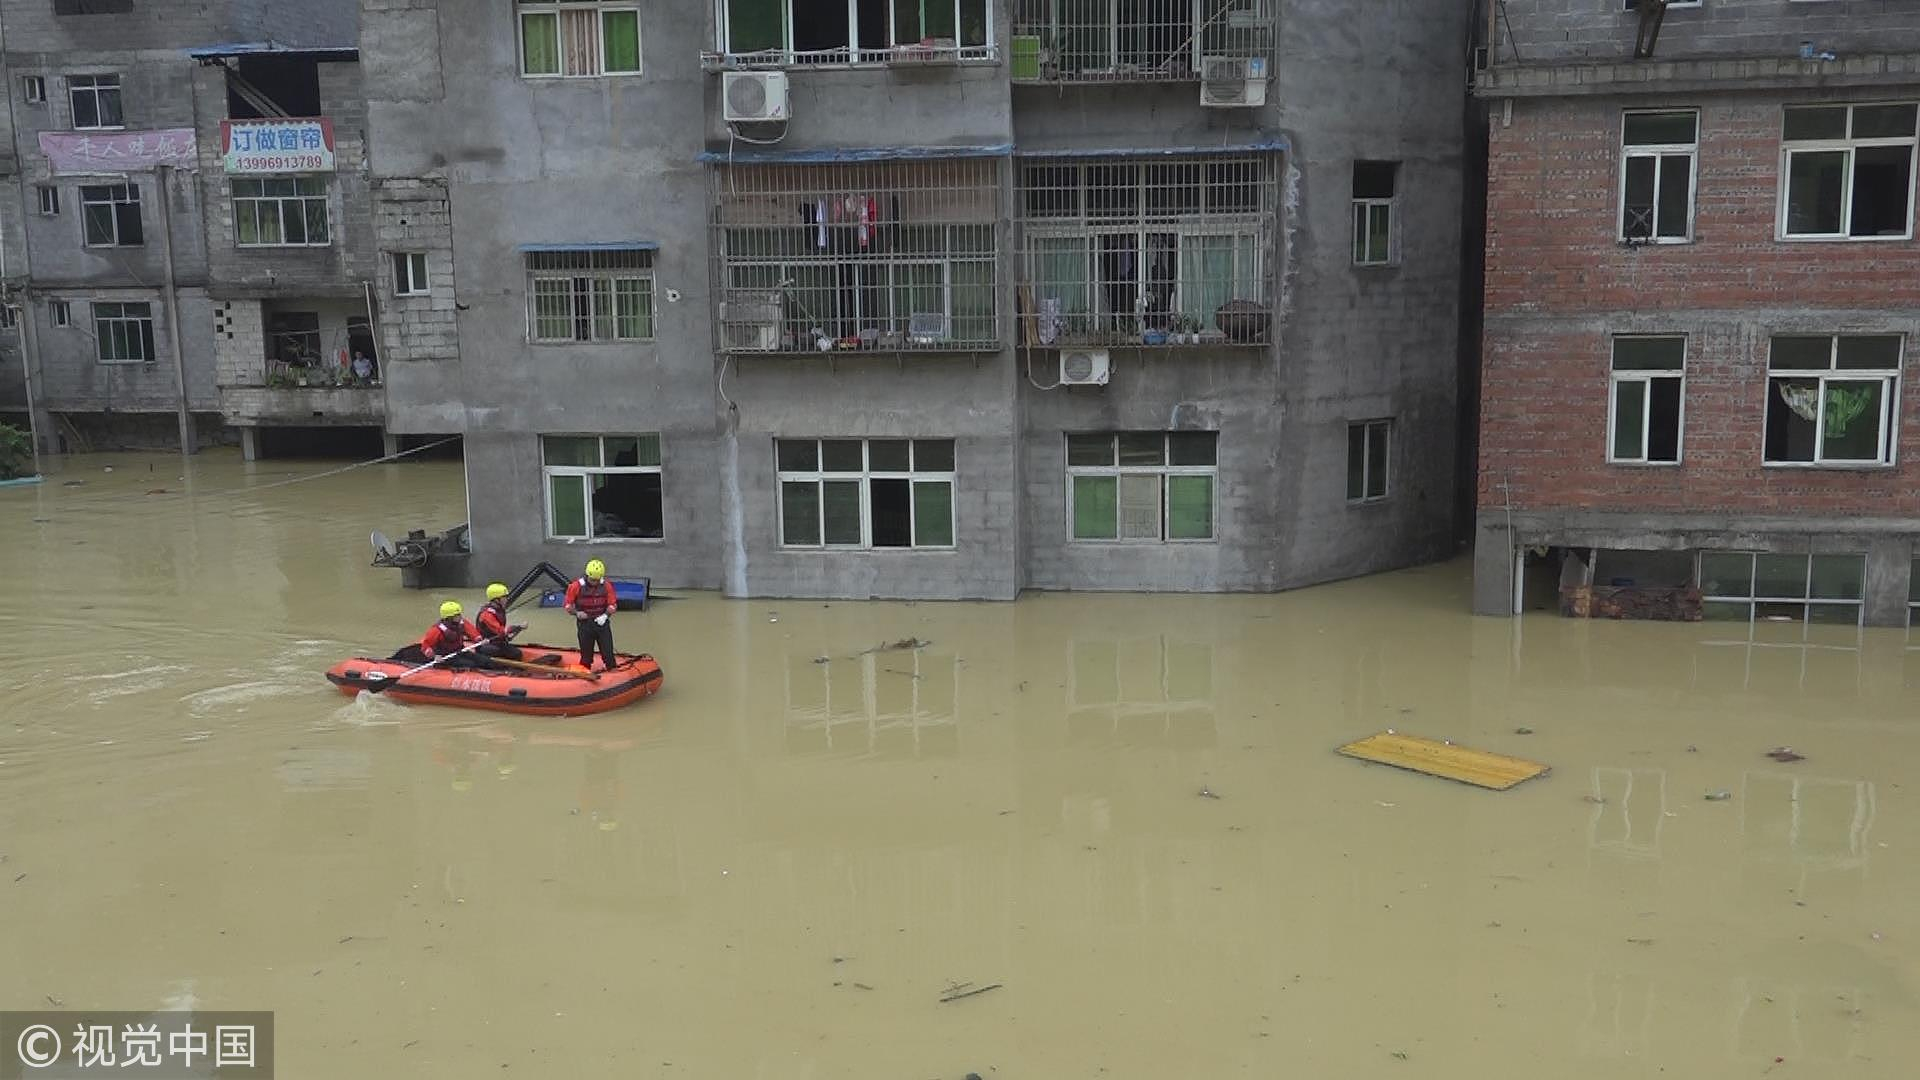 China’s firefighters use raft to relocate people stranded by rainstorm ...